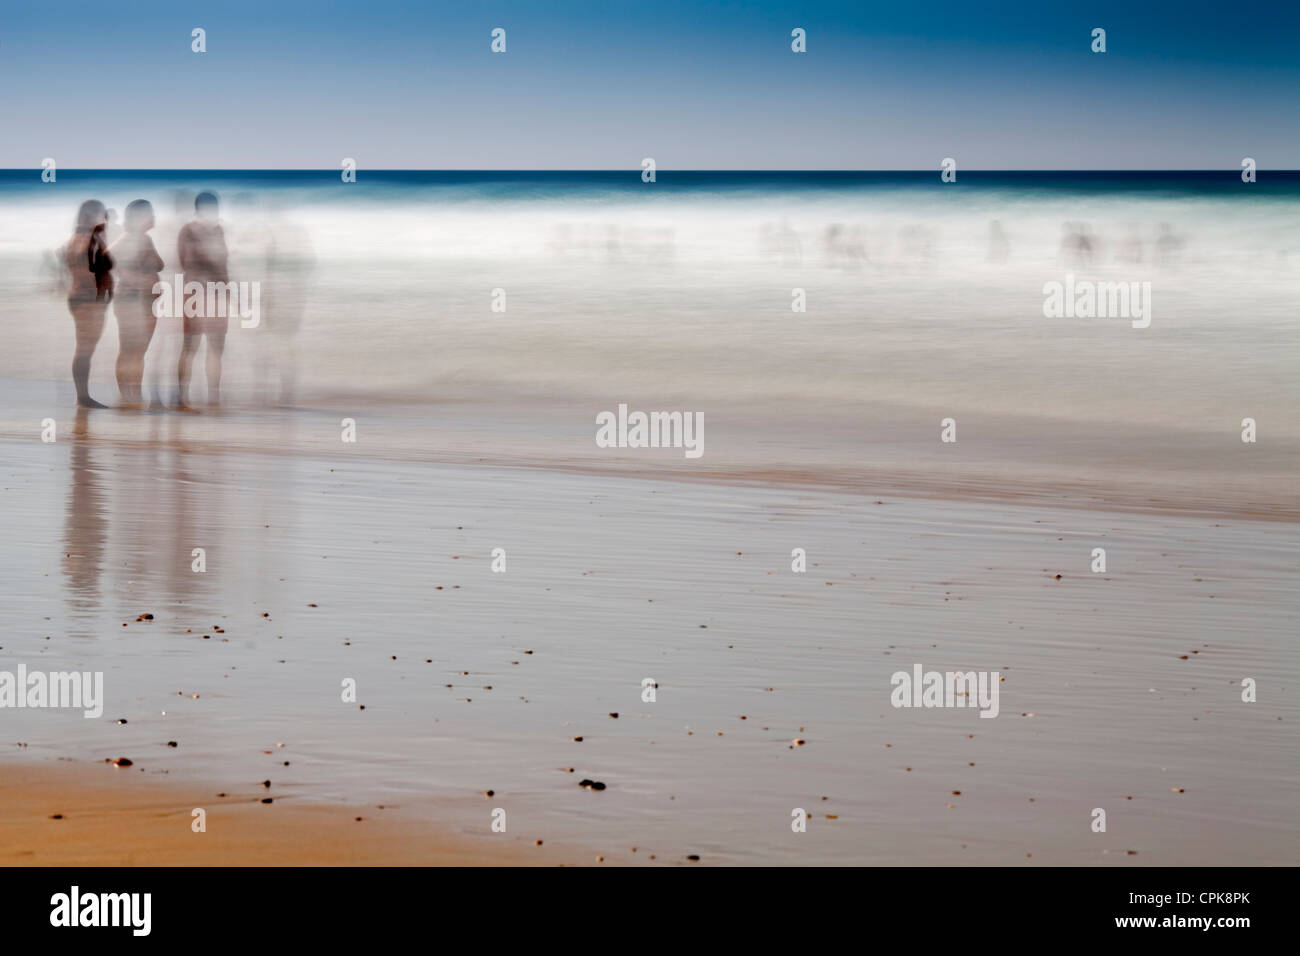 People on the beach. Daylight long exposure shot by the use of neutral density filters. Stock Photo